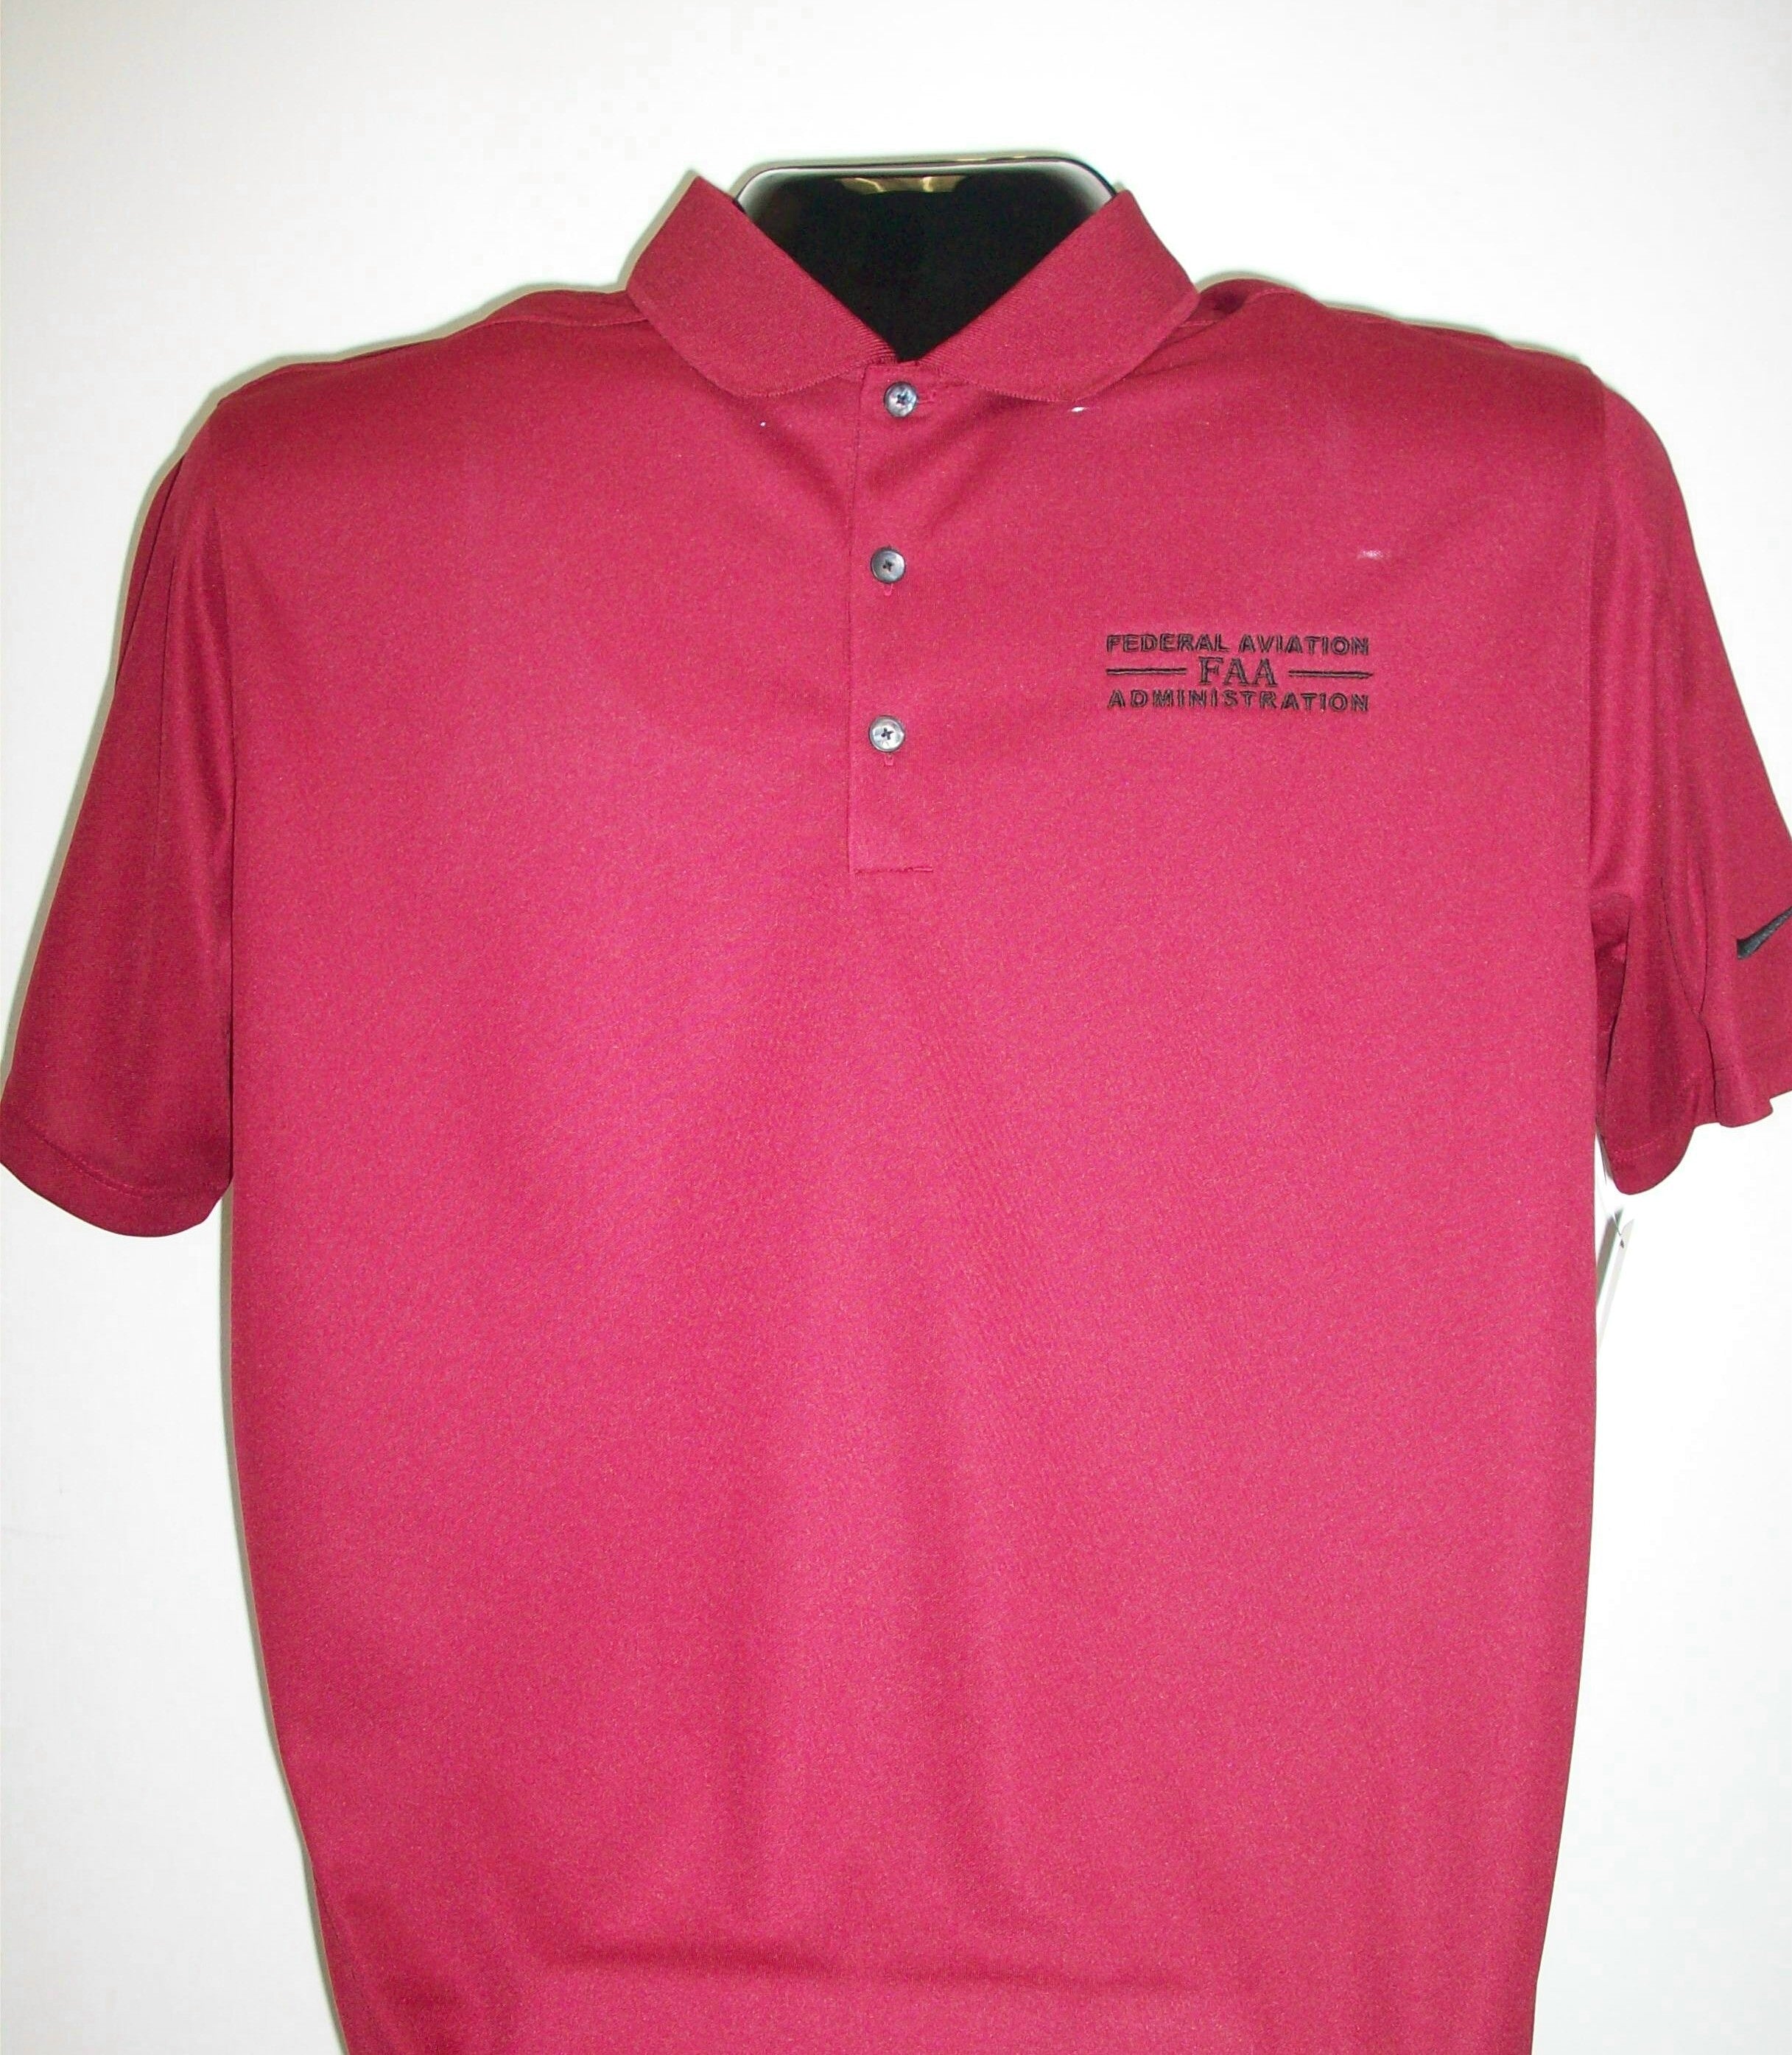 Polo Shirt FAA Nike Dry Fit 2.0 - Team Red